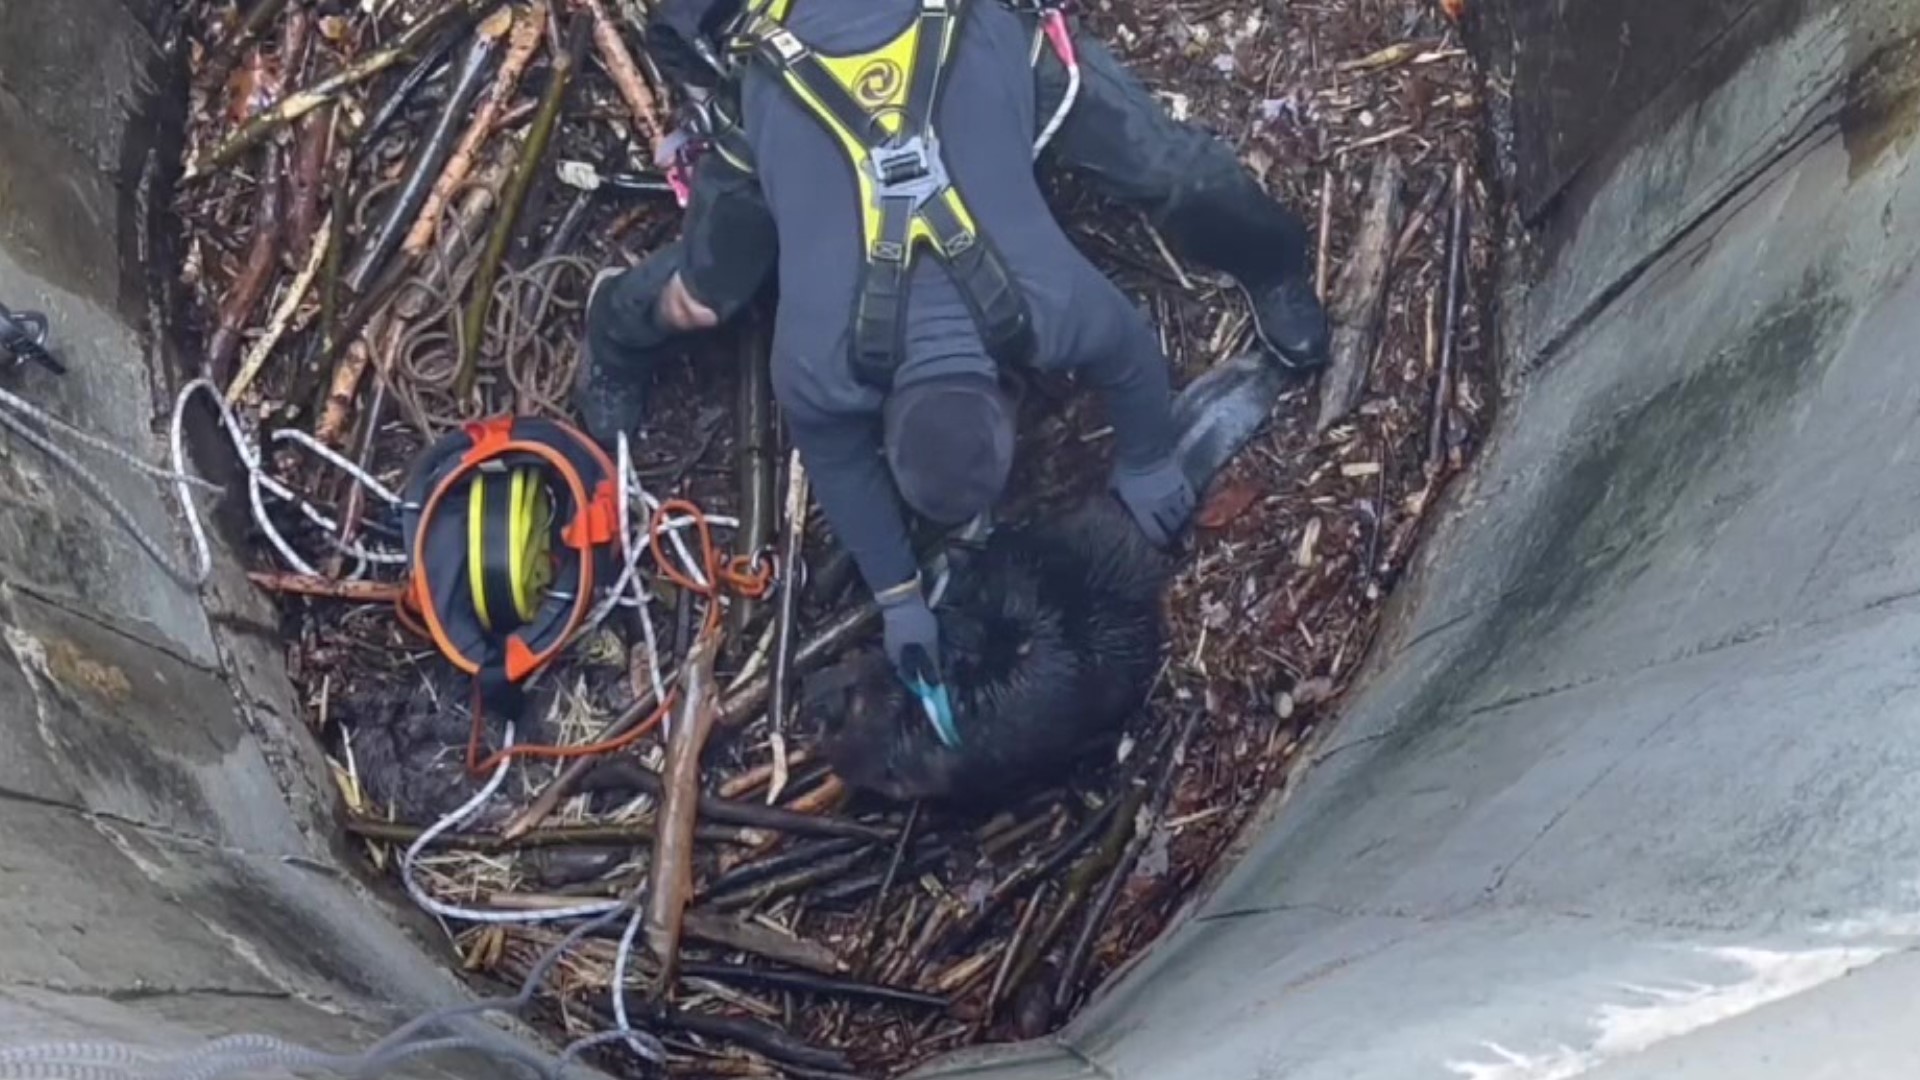 A rescue at the Campbell's Ledge Reservoir was caught on camera by Newswatch 16's Wyoming Valley news crew.